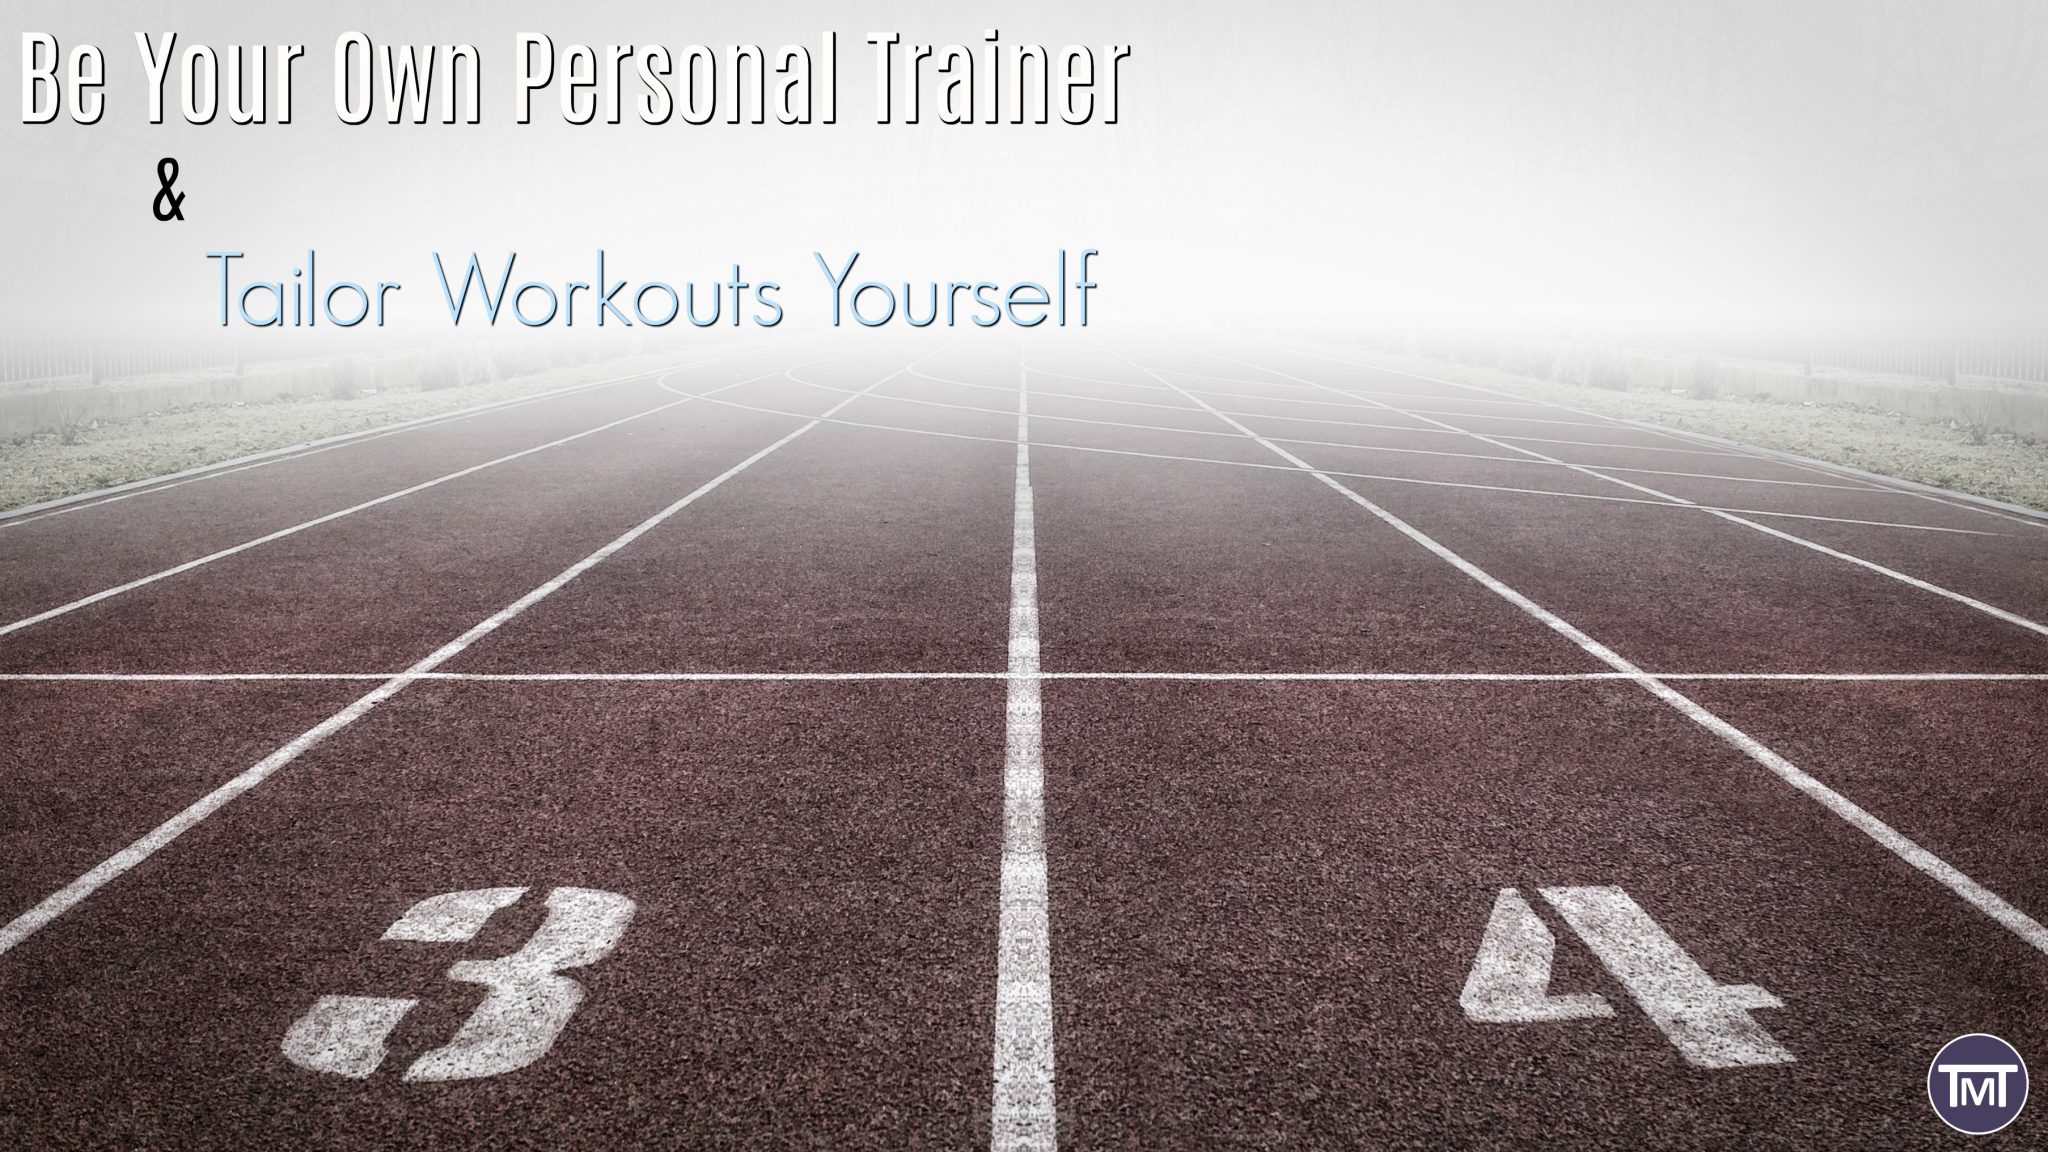 running track going off into foggy distance with text overlay - be your own personal trainer and tailor workouts yourself